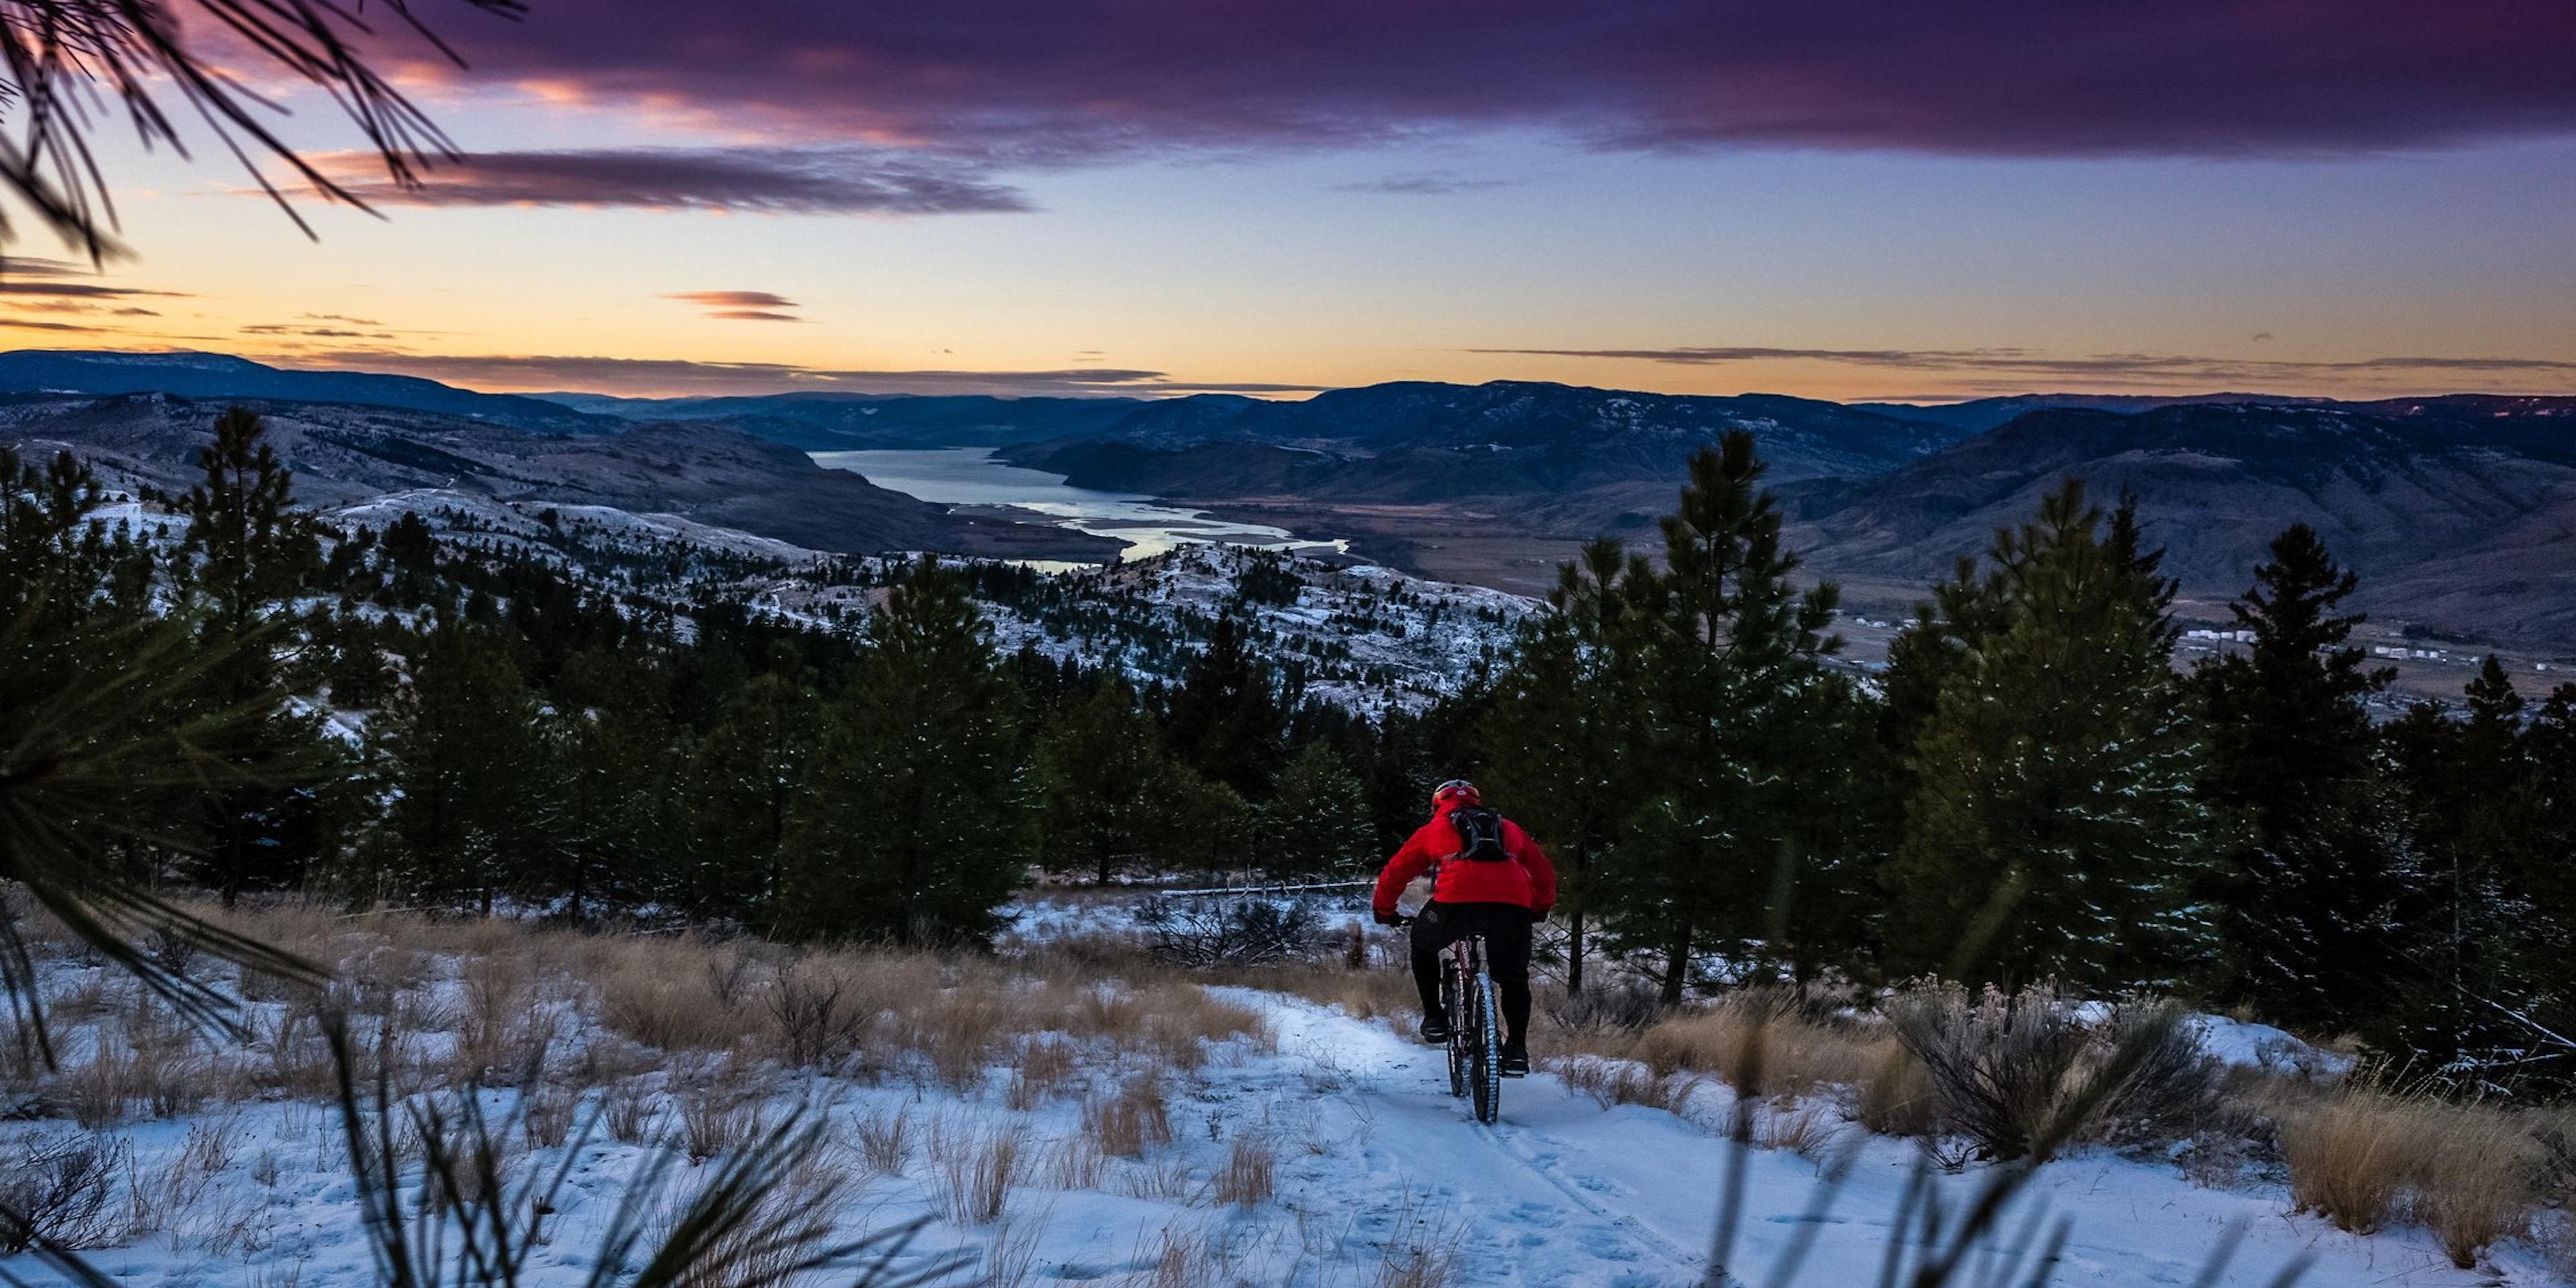 Discover Kamloops effortlessly from our hotel—conveniently located right off the highway, mere steps from Cascades Casino and Aberdeen Mall. Enjoy quick access to renowned attractions such as Sun Peaks Ski Resort, Tobiano Golf Course, scenic hiking trails, and more!